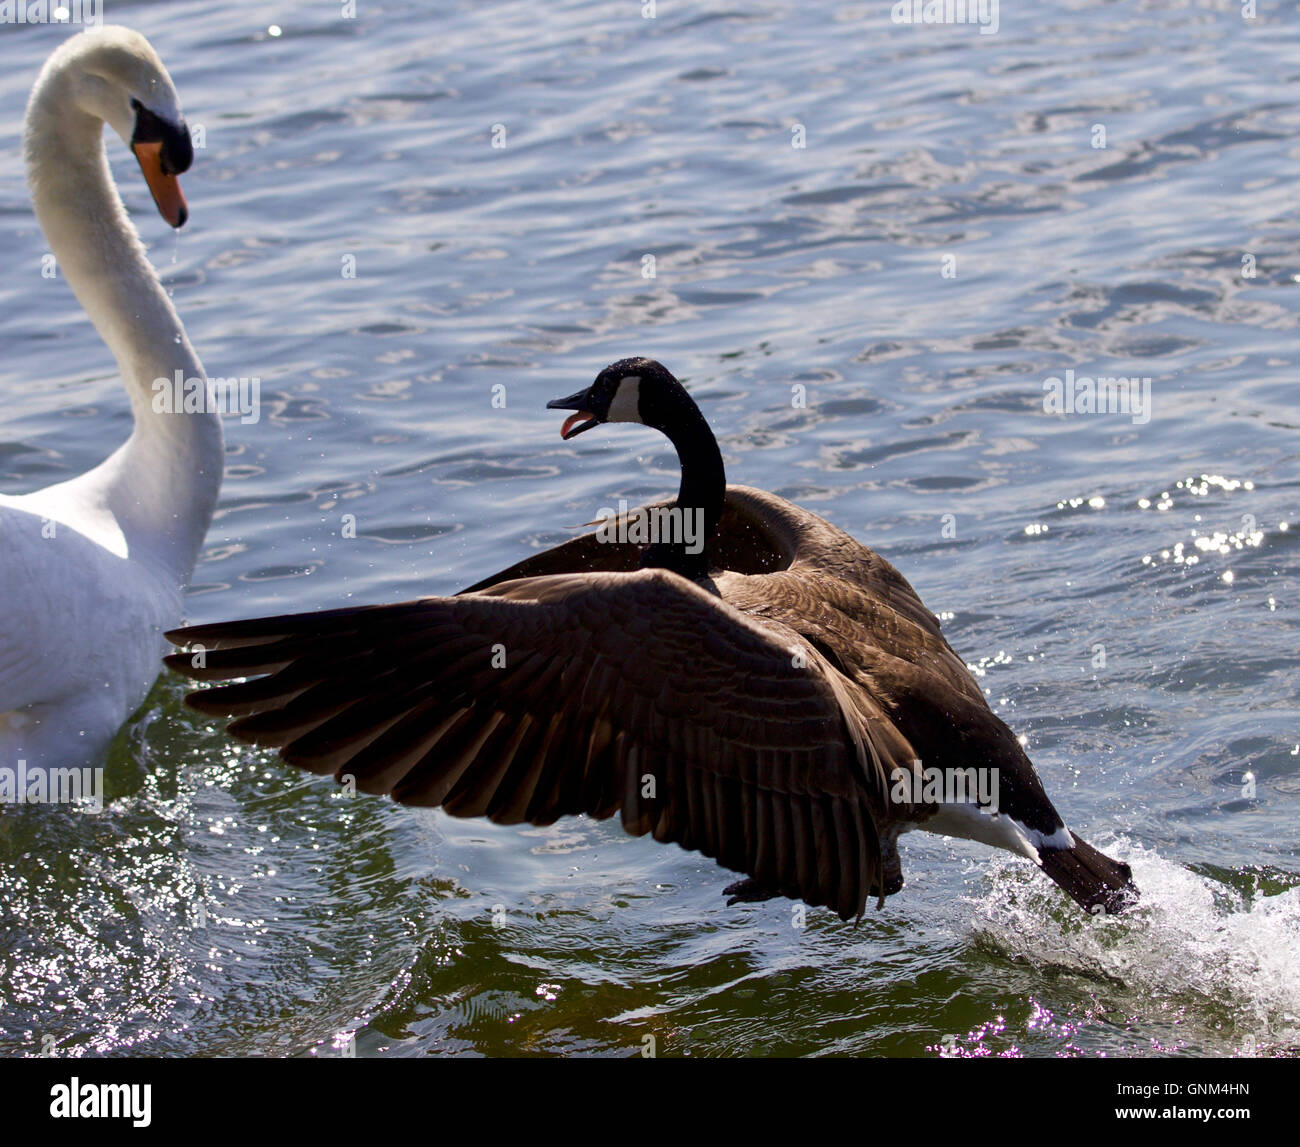 Amazing photo of the epic fight between a Canada goose and a swan on the lake Stock Photo